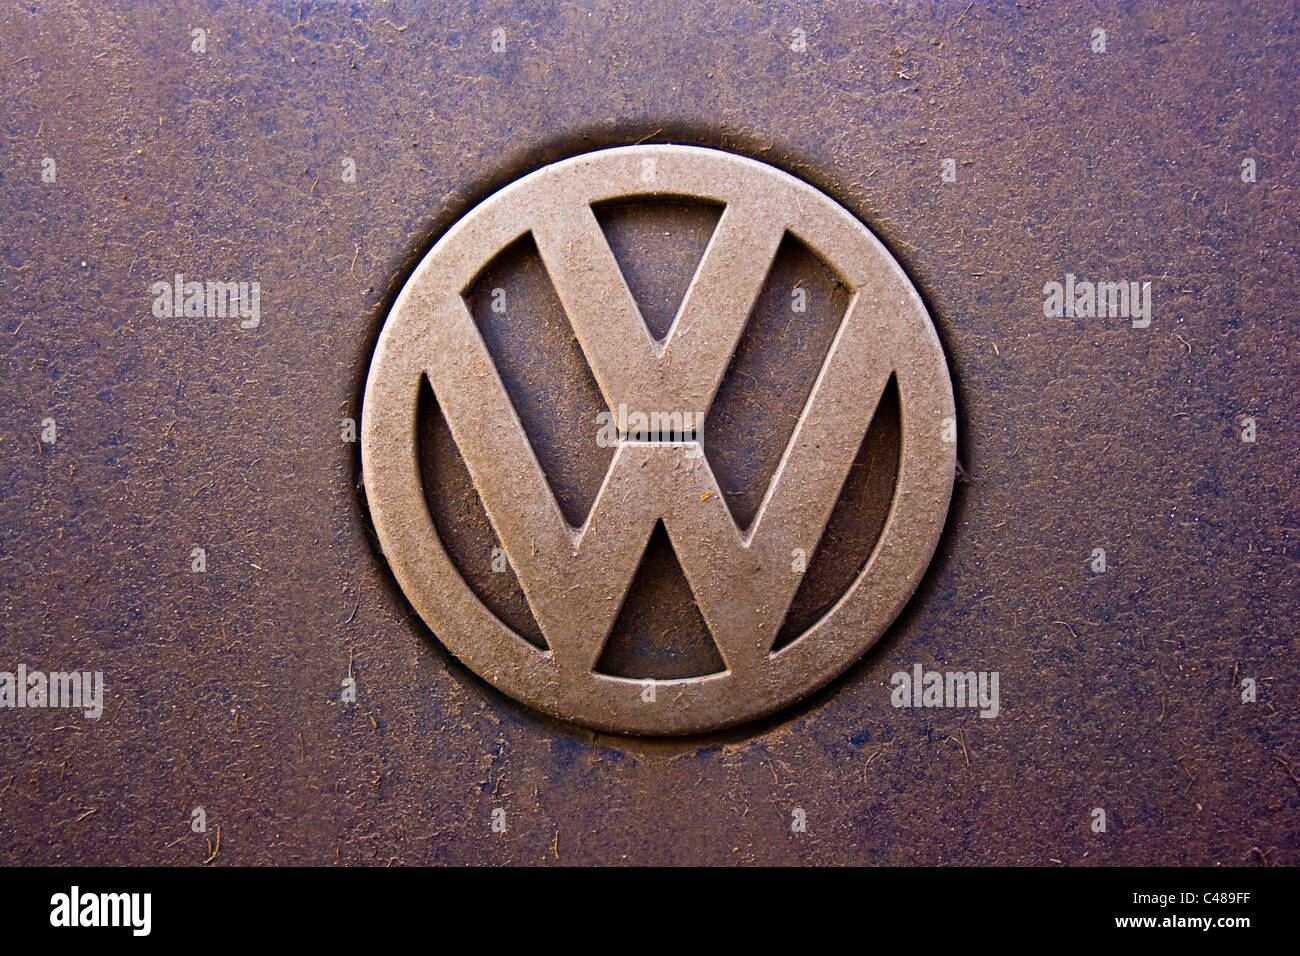 A Volkswagen logo looking rather dirty from the use of the car on which it is featured. (Editorial use only). Stock Photo